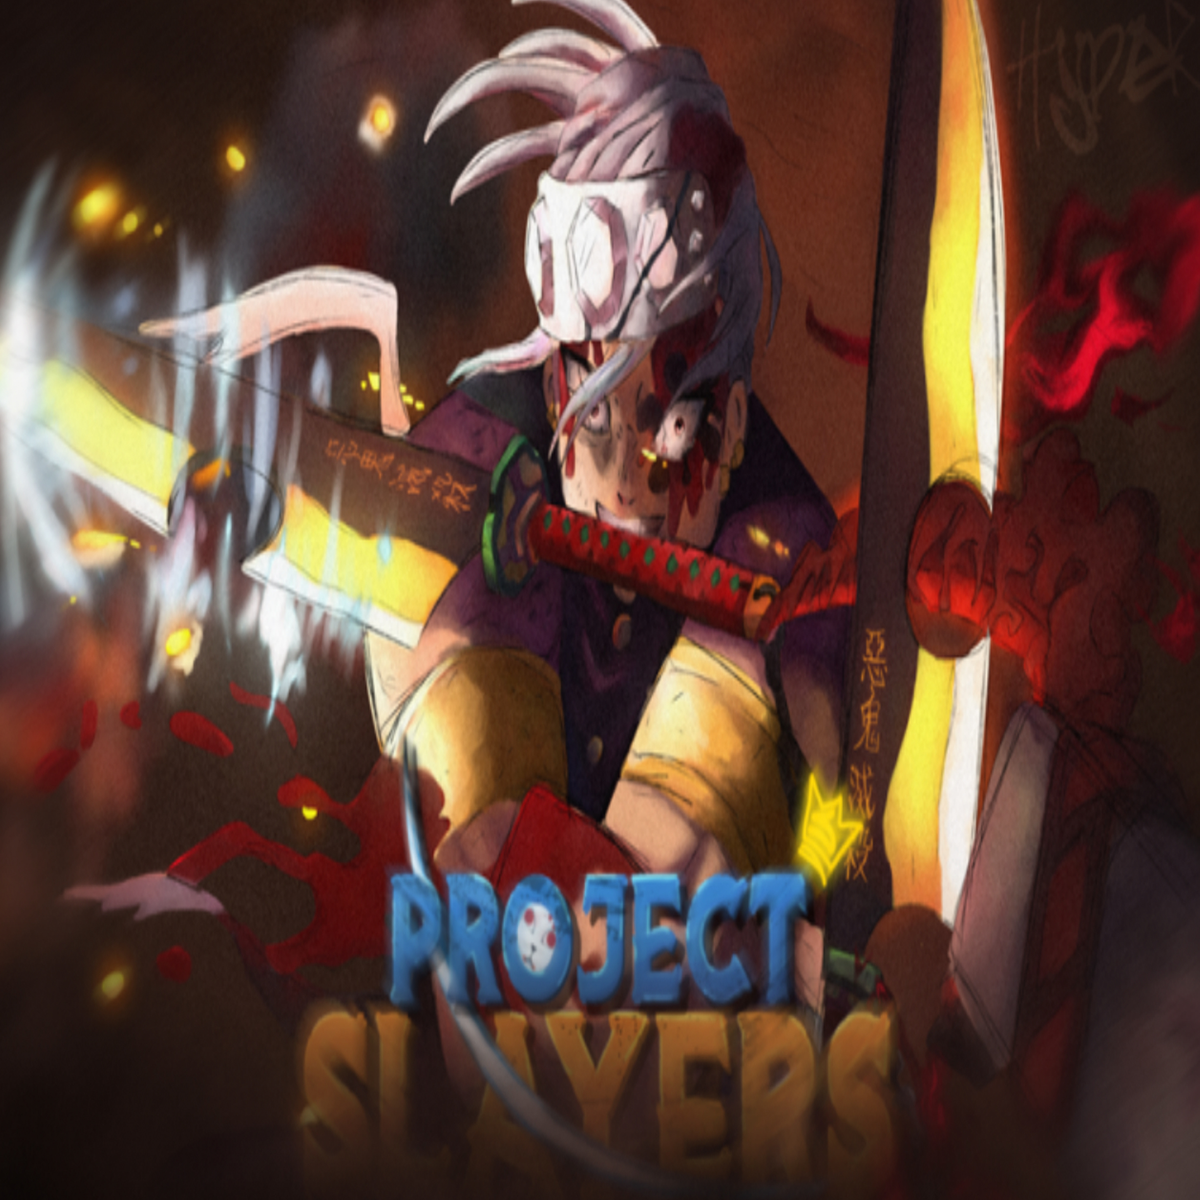 Increased Rates⏫] [🔥👹 UPDATE 1] Project Slayers codes: Free